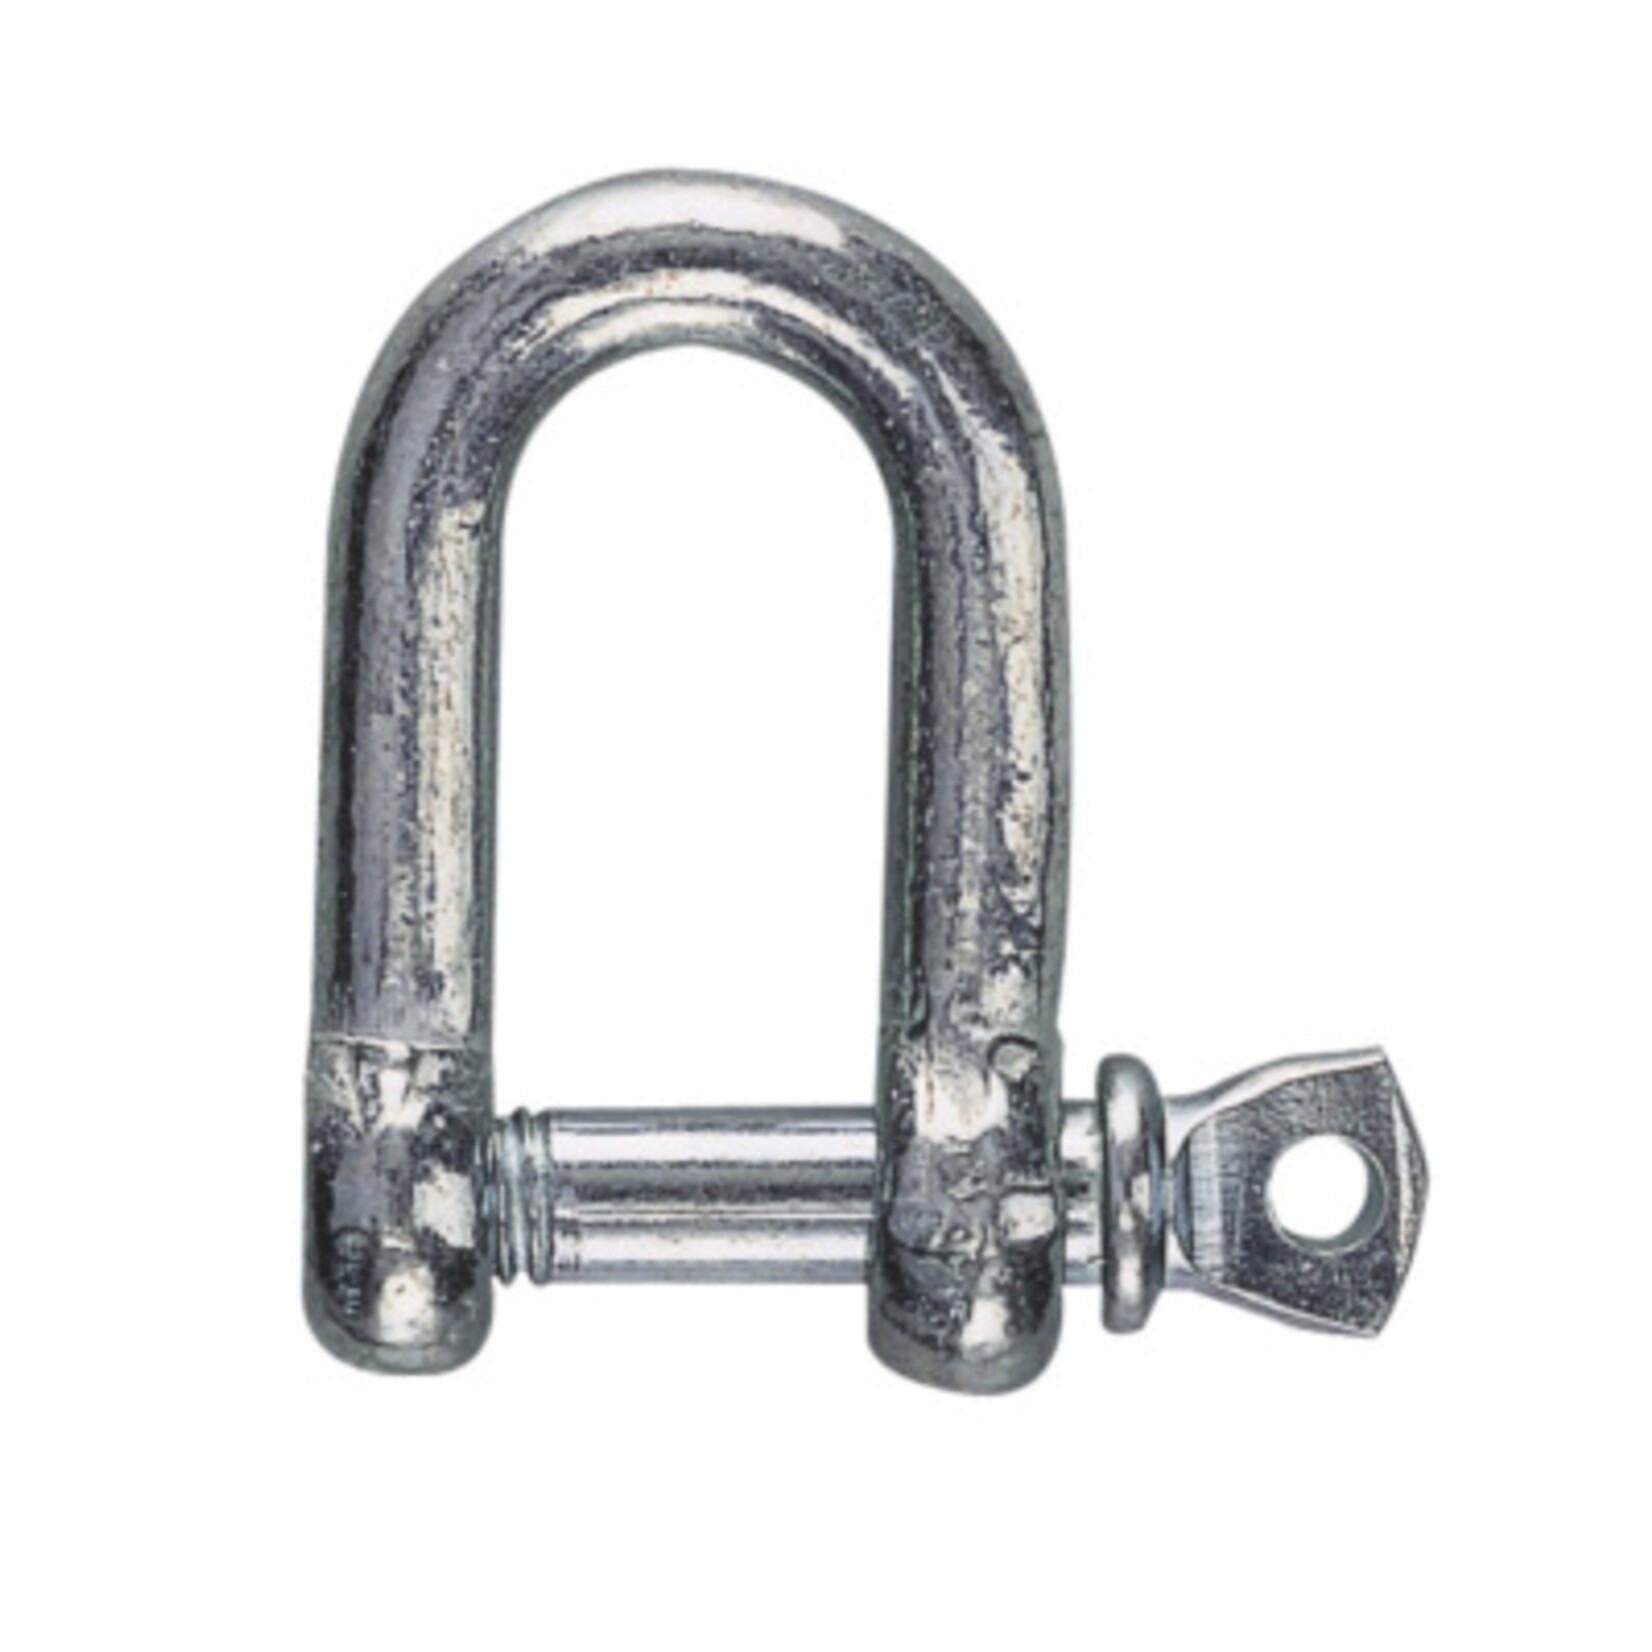 Plastimo Shackle gal d-shap dia 6mm yellow code